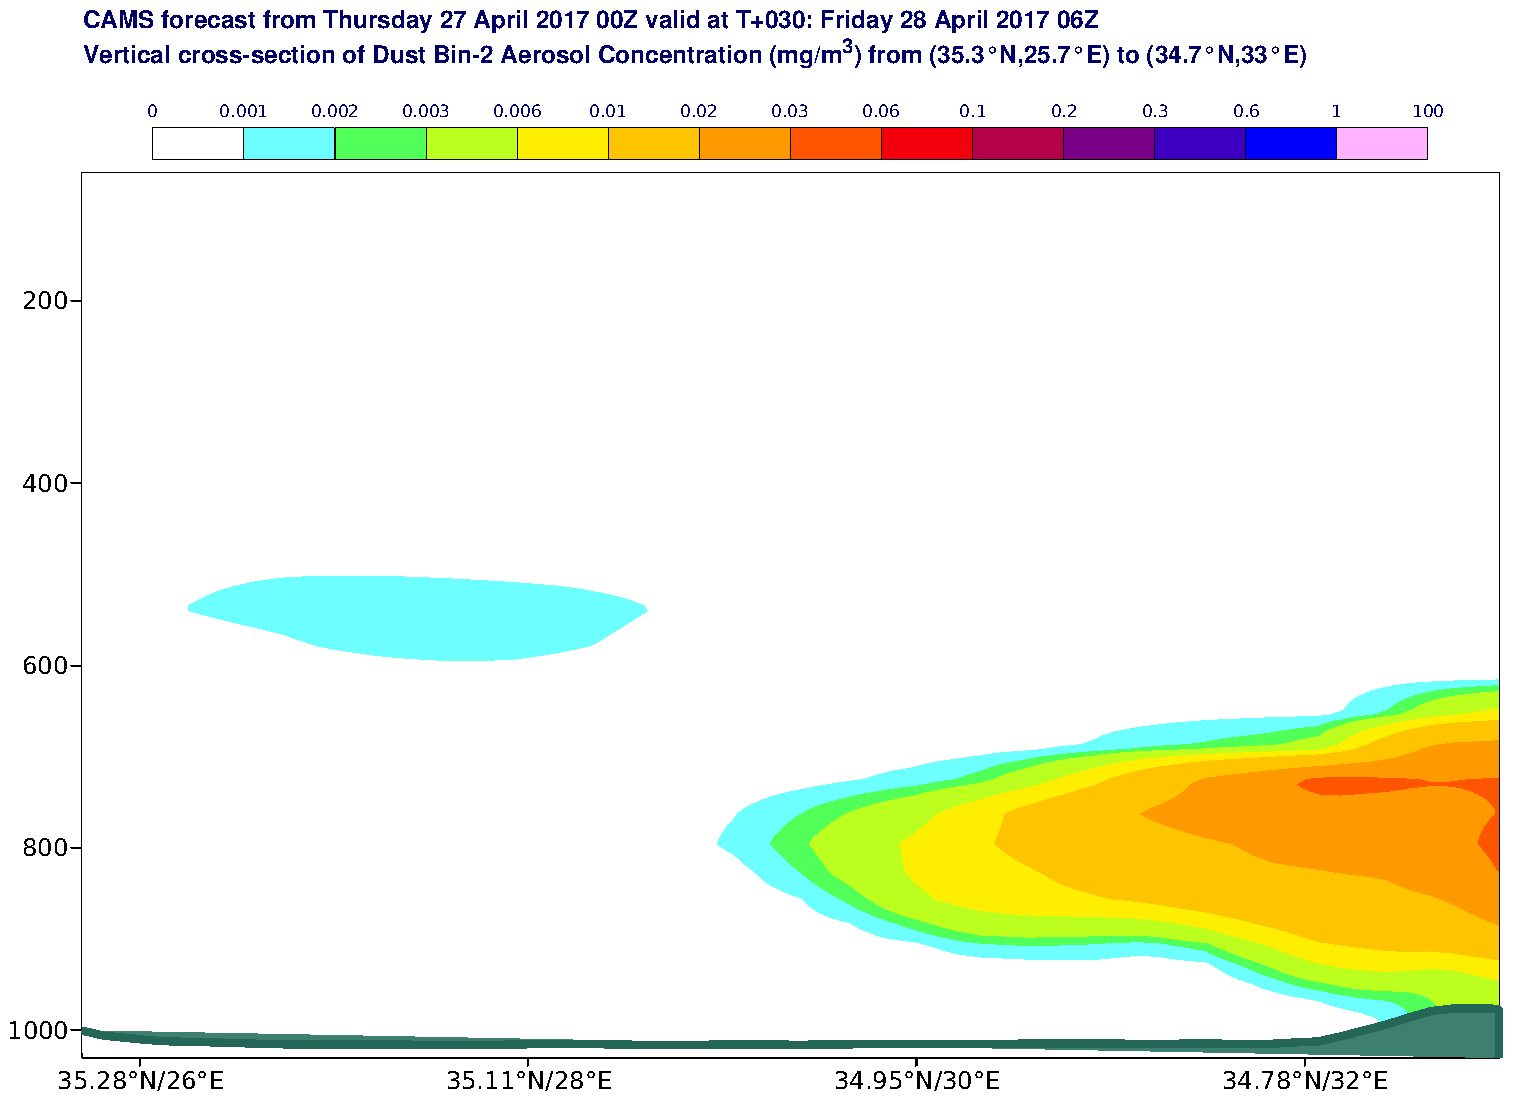 Vertical cross-section of Dust Bin-2 Aerosol Concentration (mg/m3) valid at T30 - 2017-04-28 06:00